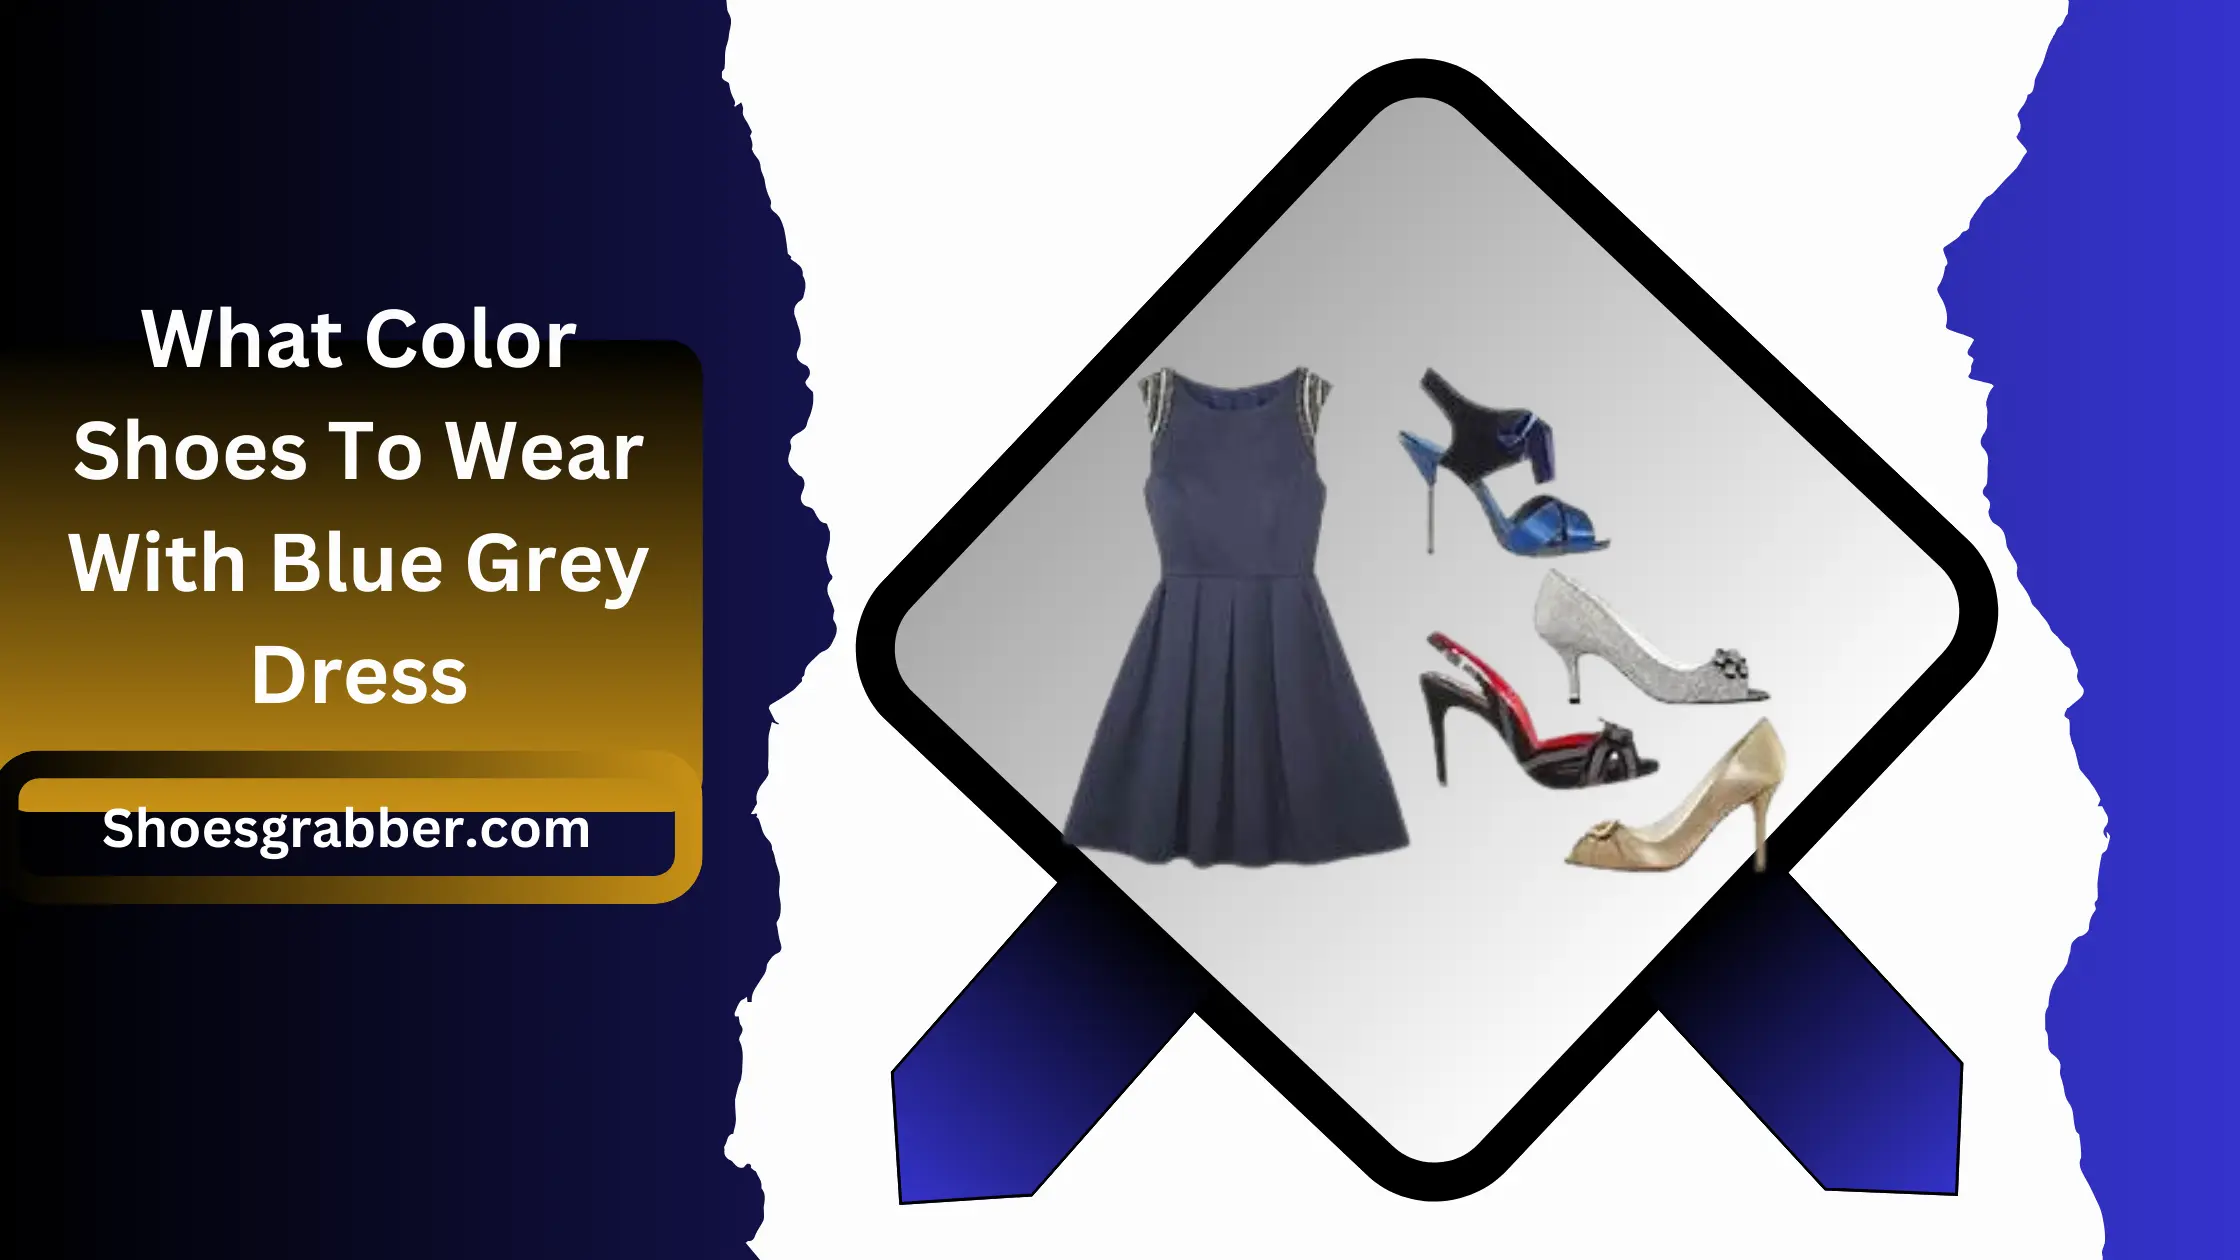 What Color Shoes To Wear With Blue Grey Dress - An Essential Guide